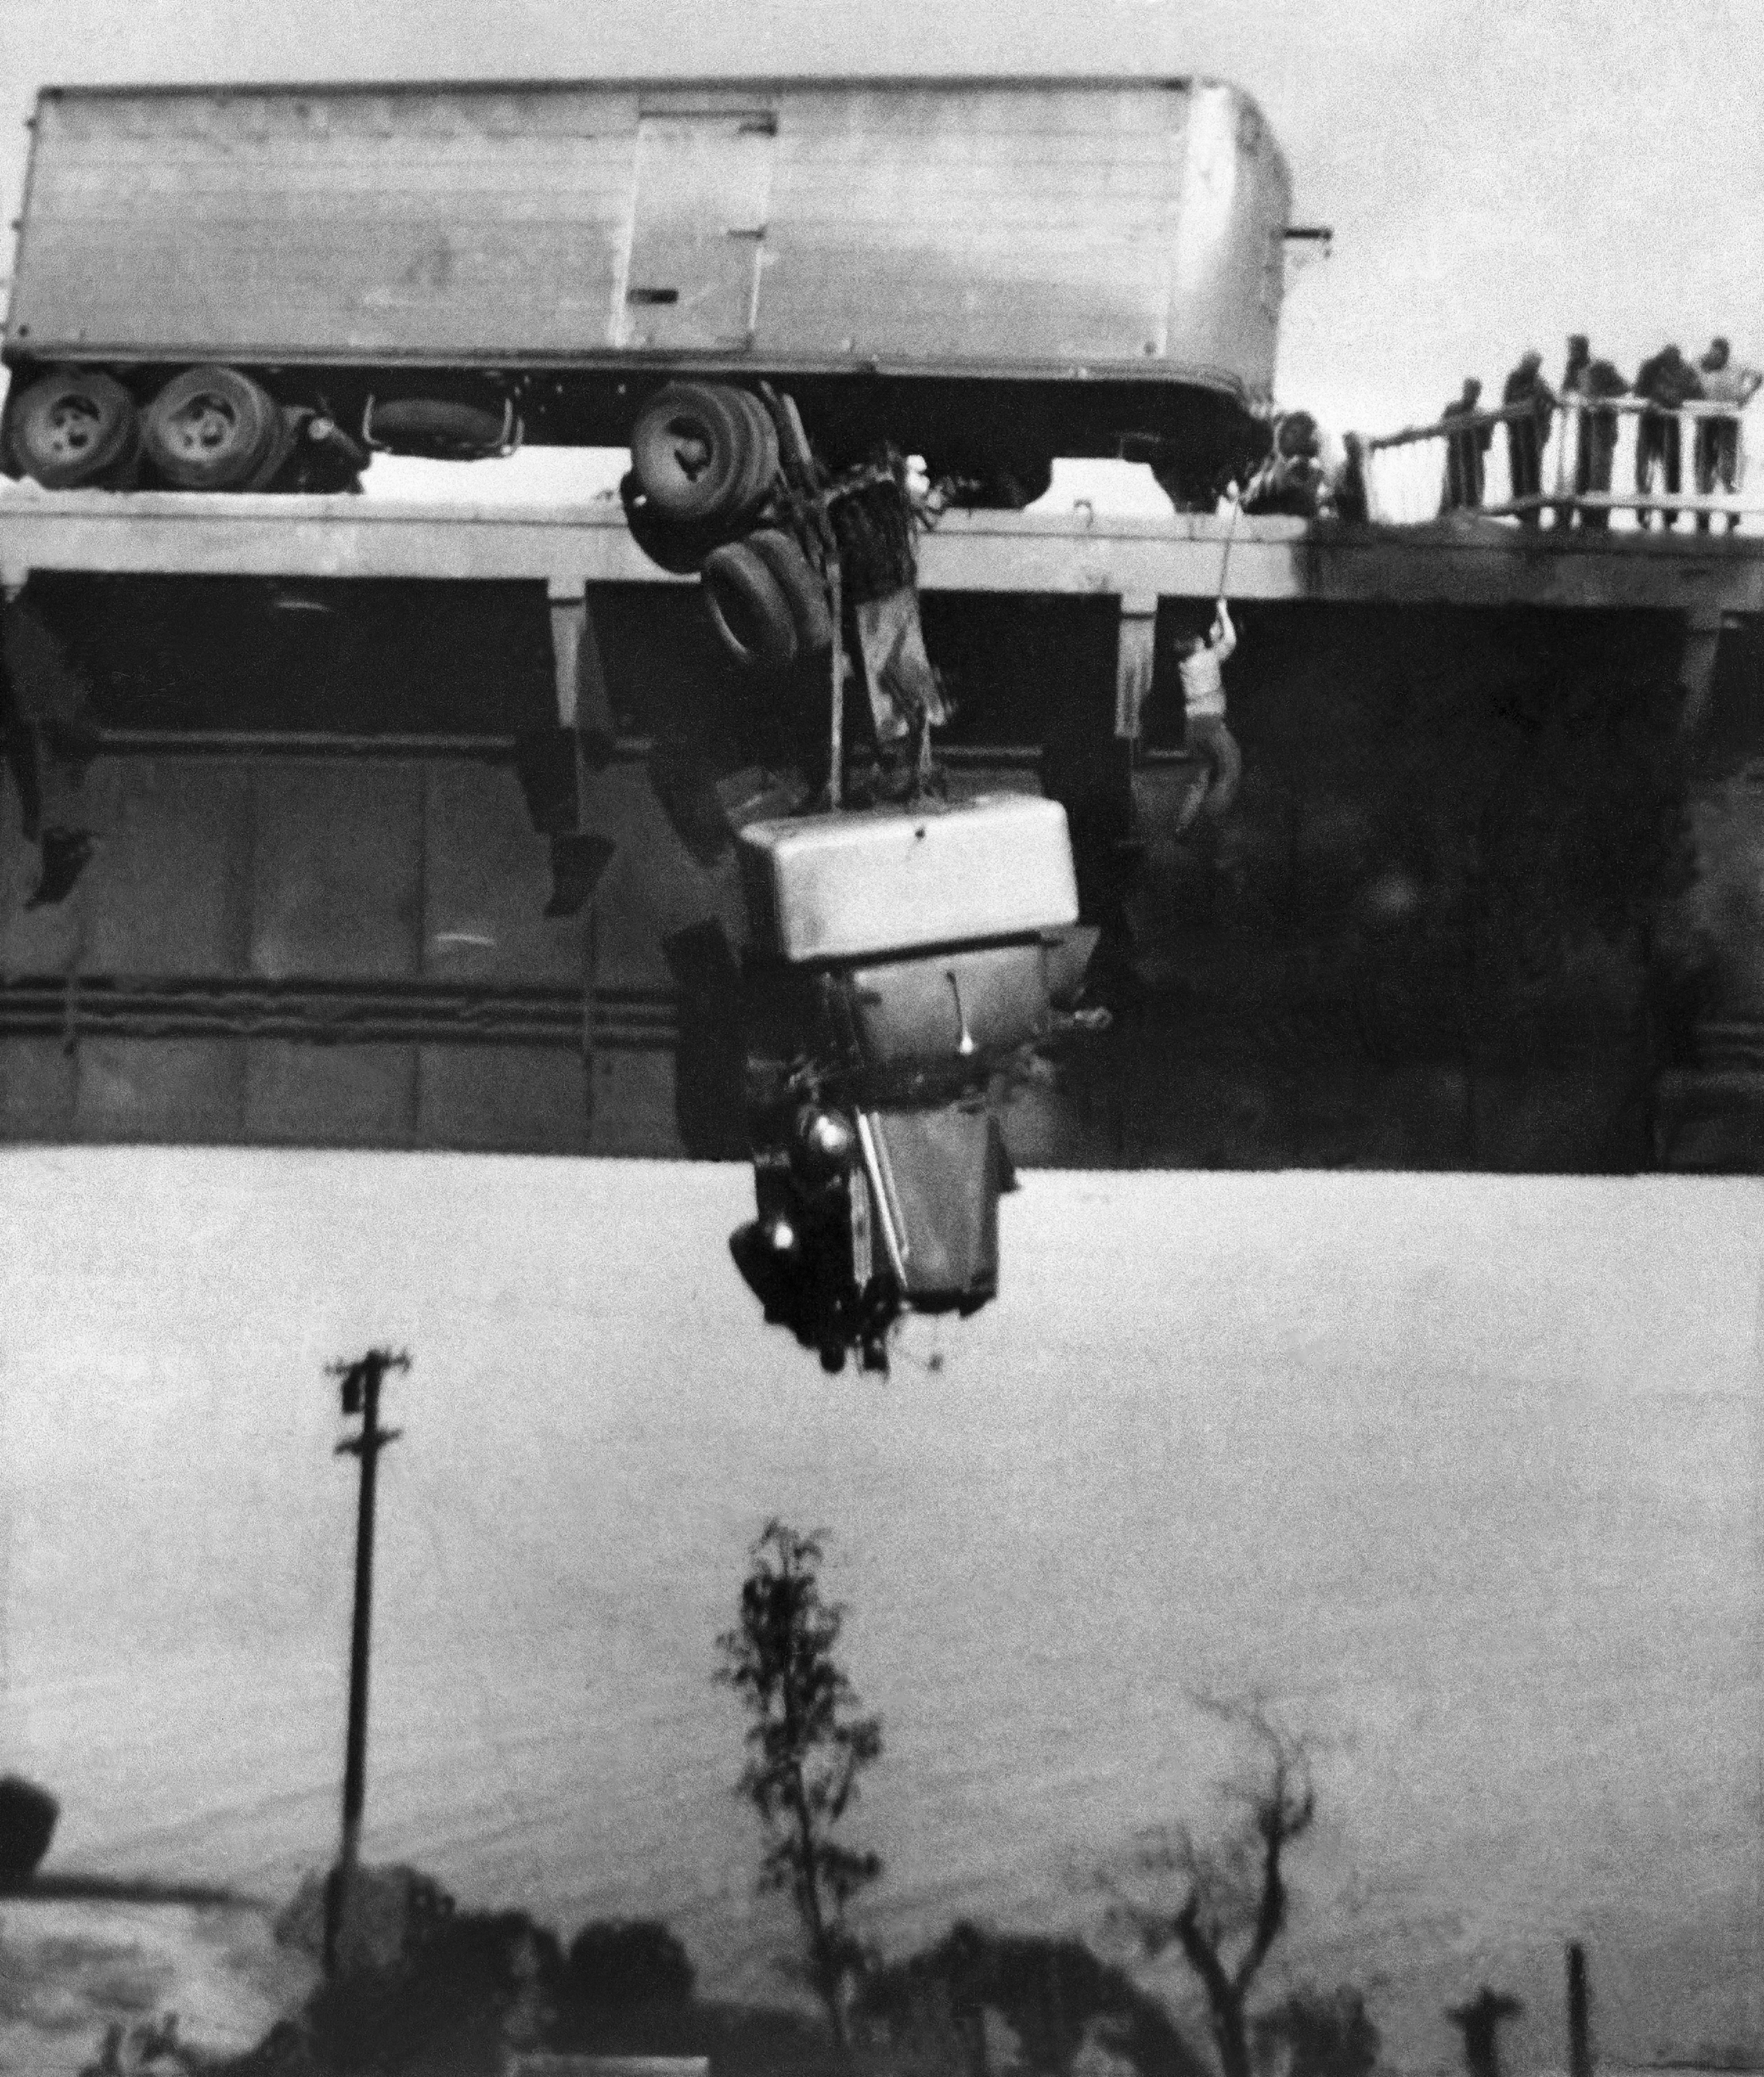 Paul Overby, one of two drivers trapped in the cab of a tractor trailer, is pulled to safety by a rope on the Pit River Bridge across Shasta Lake near Redding, Calif., May 3, 1953. Both Overby and co-driver Hank Baum were rescued before the cab burned and fell to the rocks below. Virginia Schau, an amateur photographer, used a Kodak Brownie camera to shoot the photo. (Virginia Schau via AP)